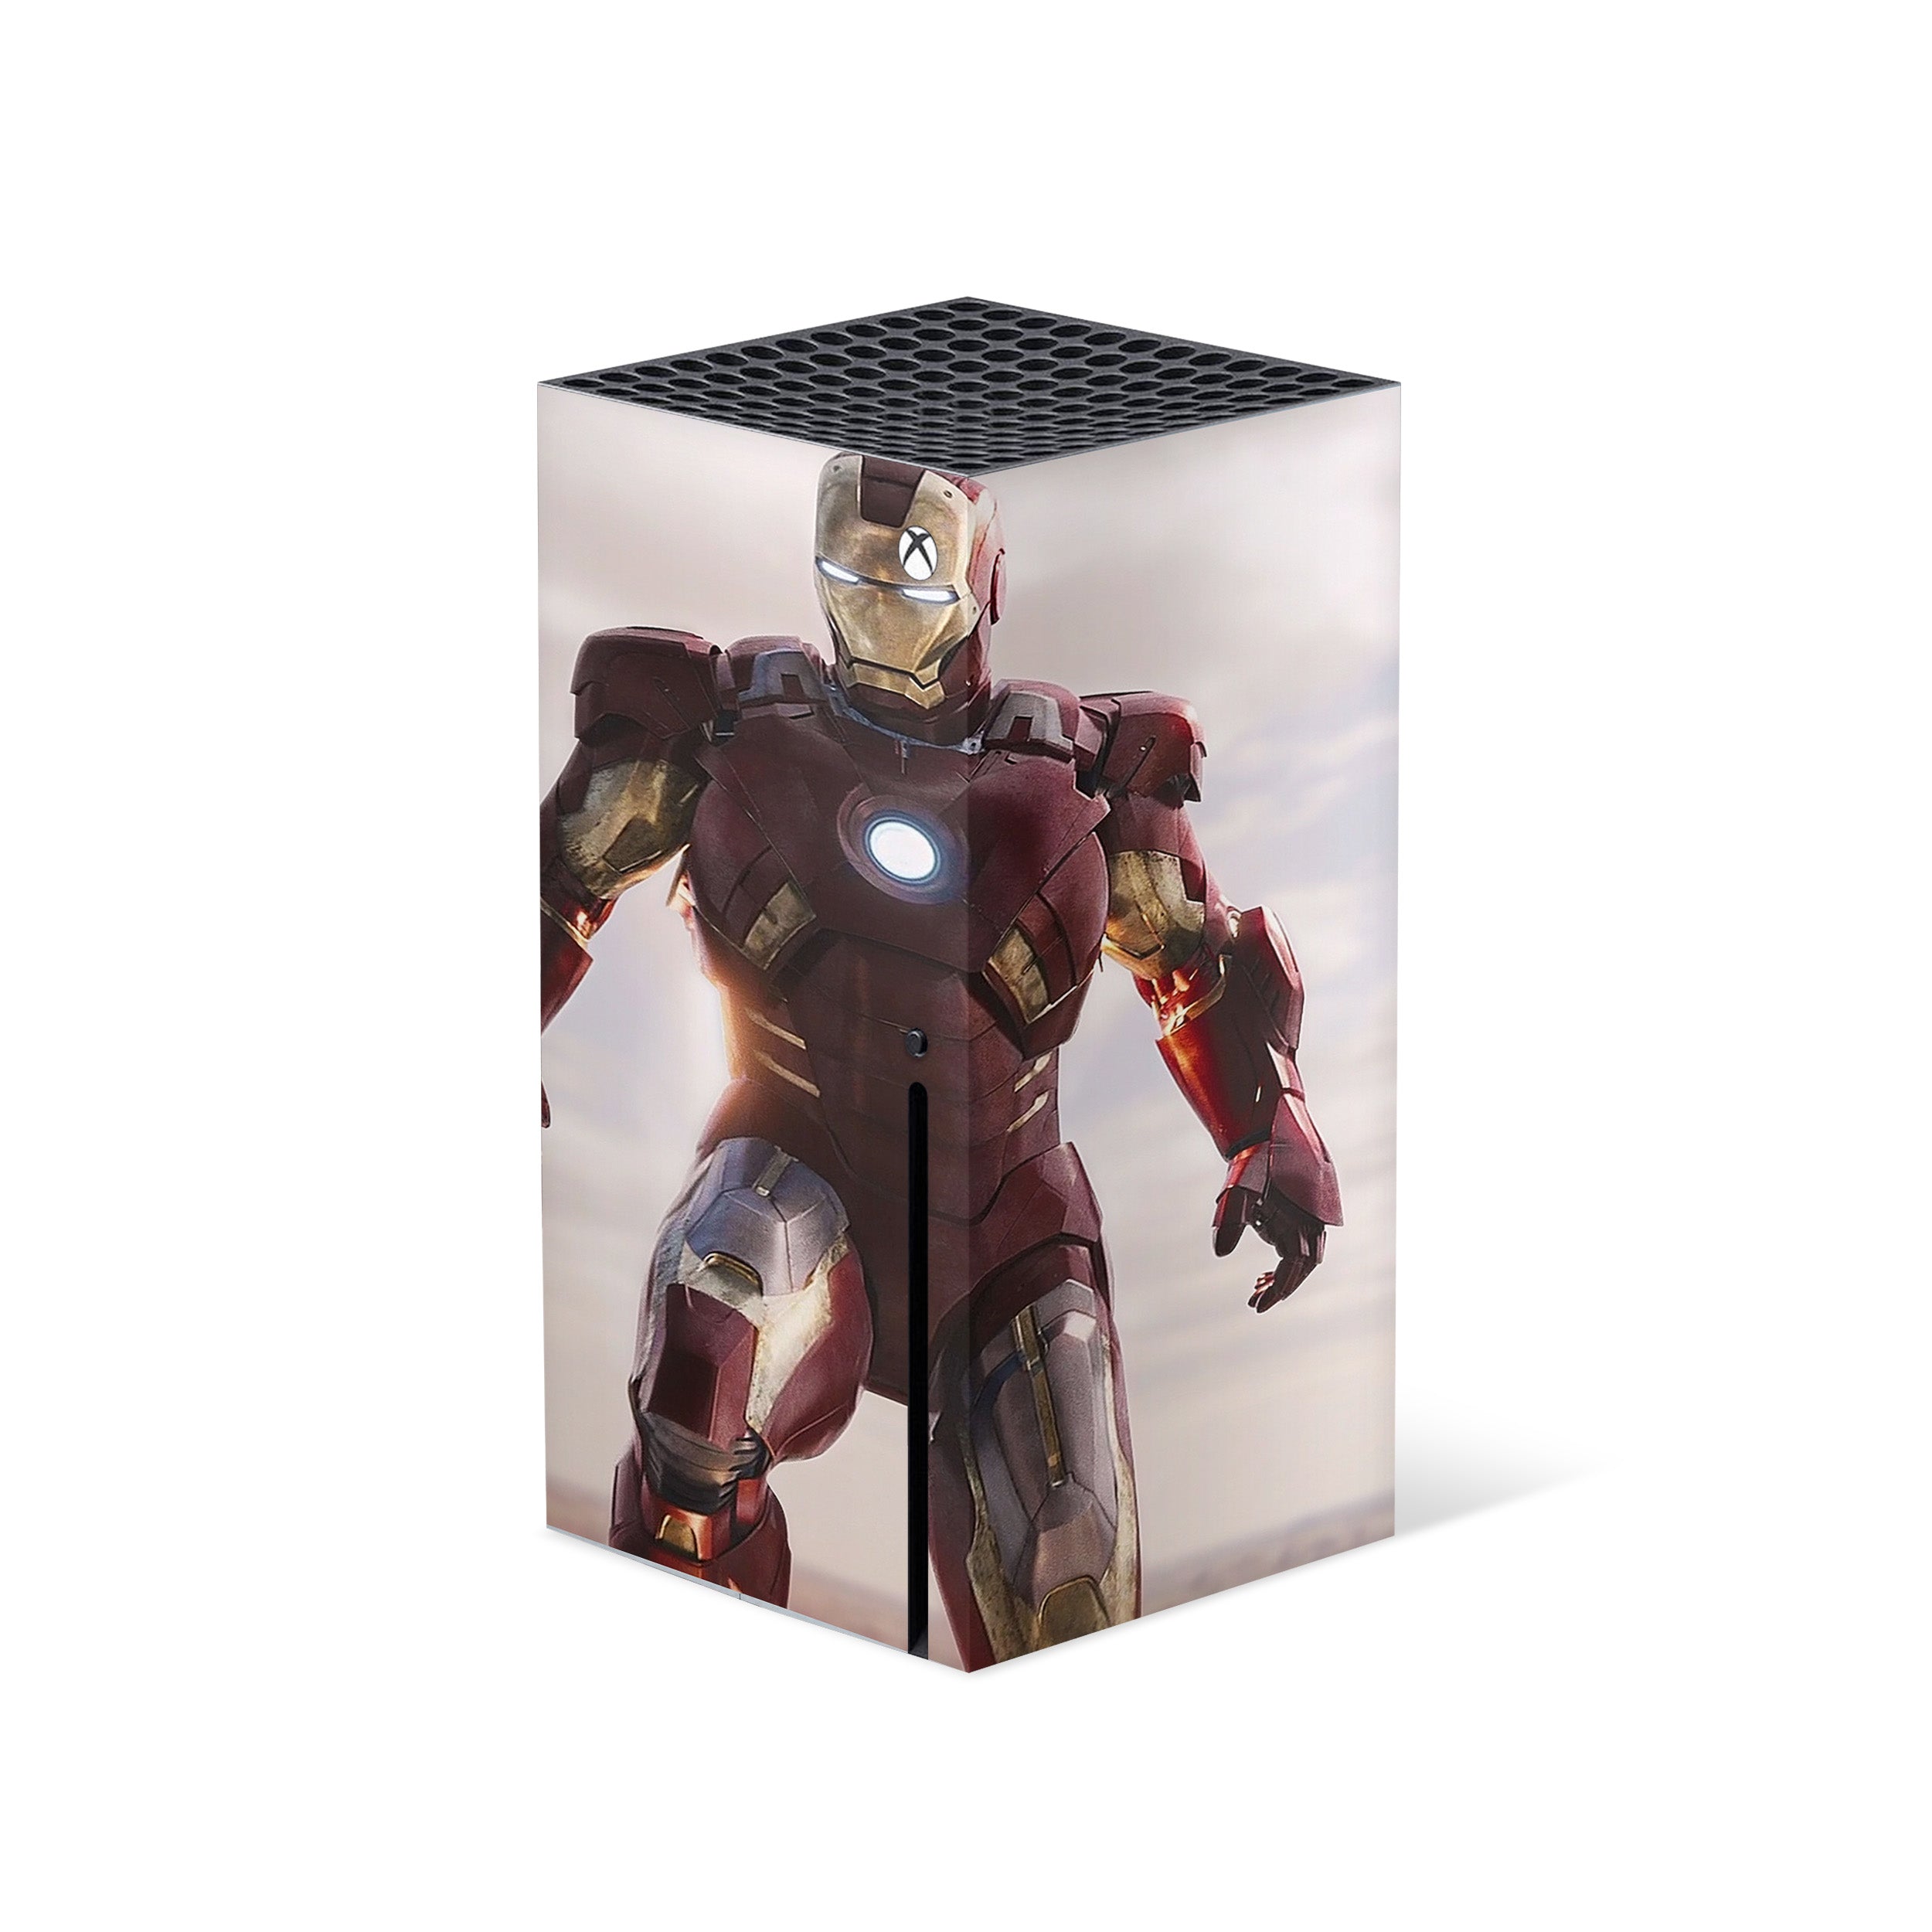 A video game skin featuring a Marvel Iron Man design for the Xbox Series X.